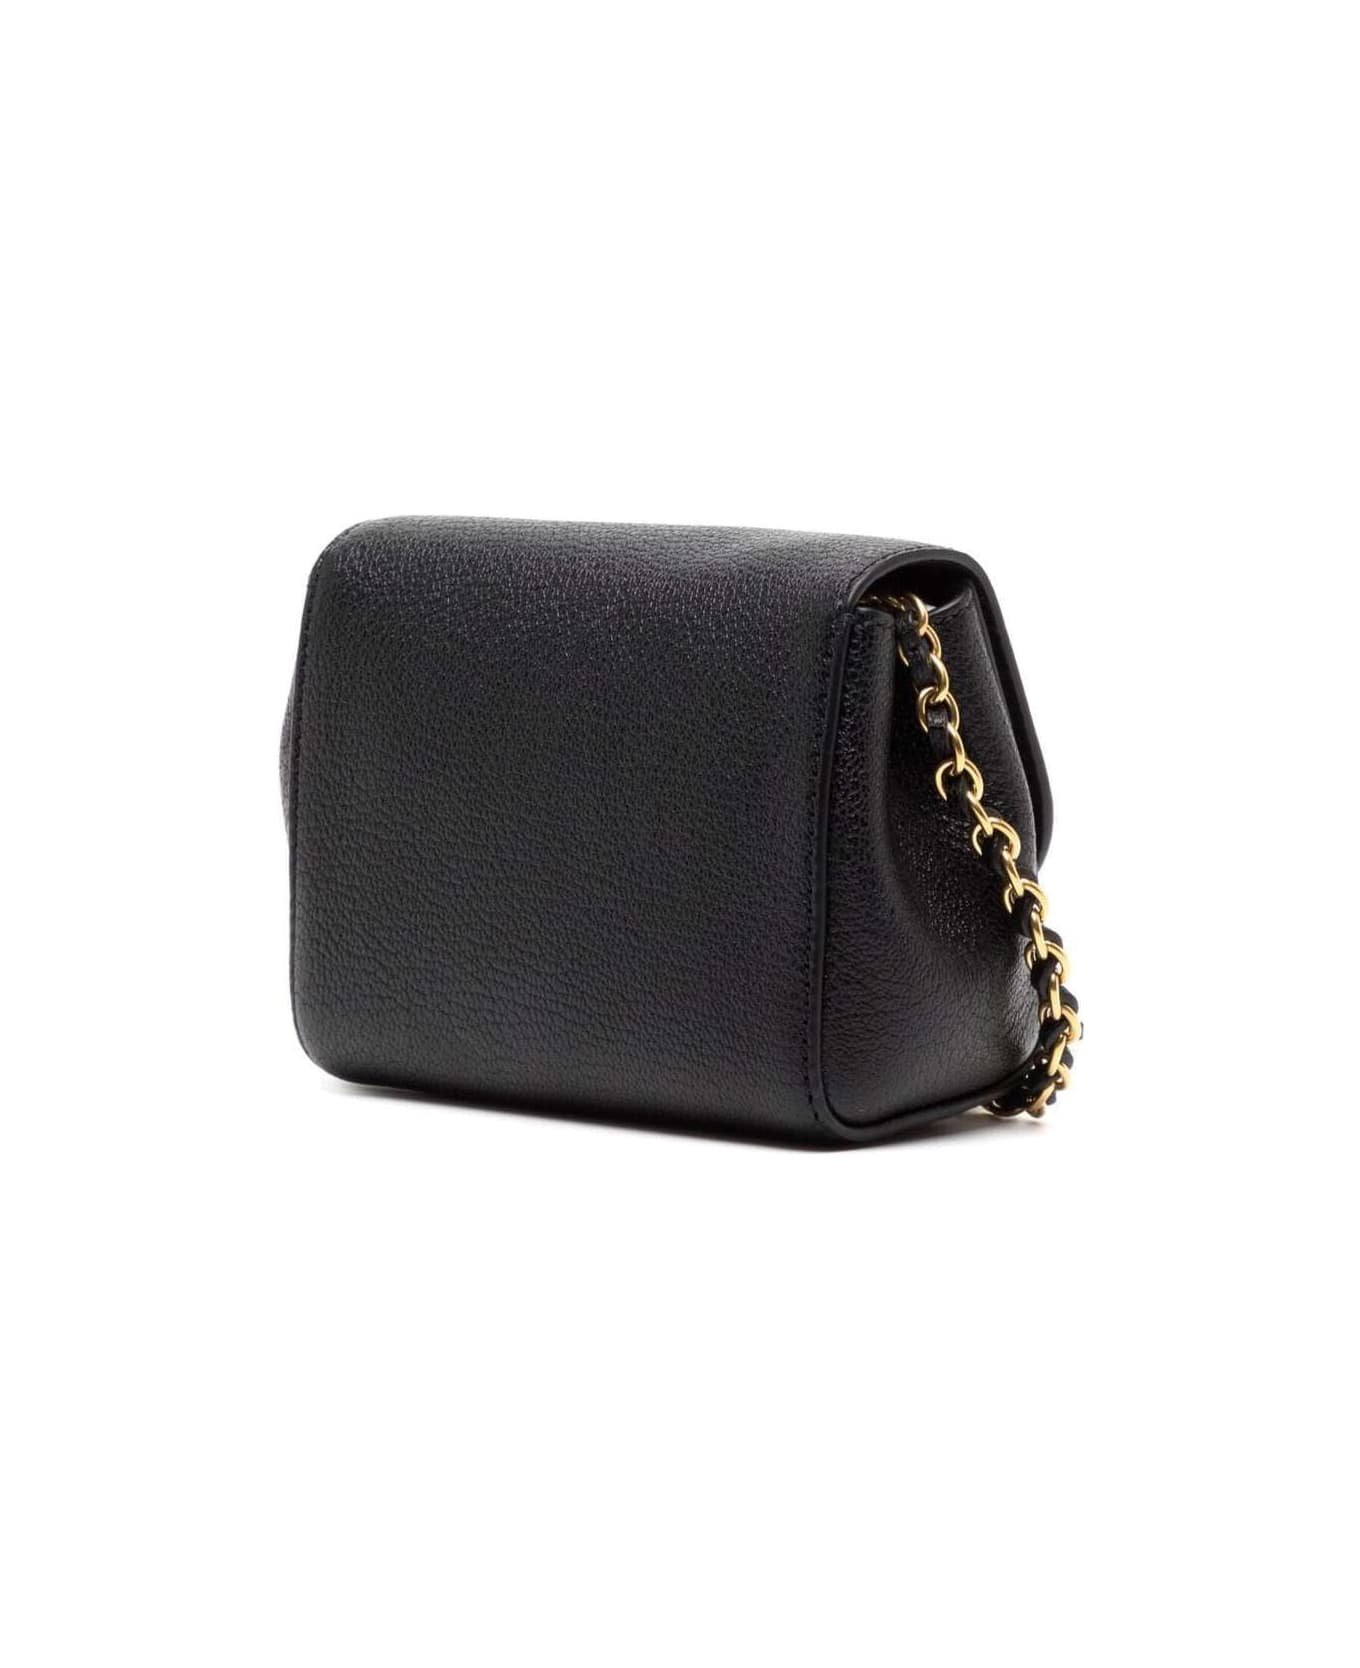 Mulberry Mini Lily Glossy Goat | italist